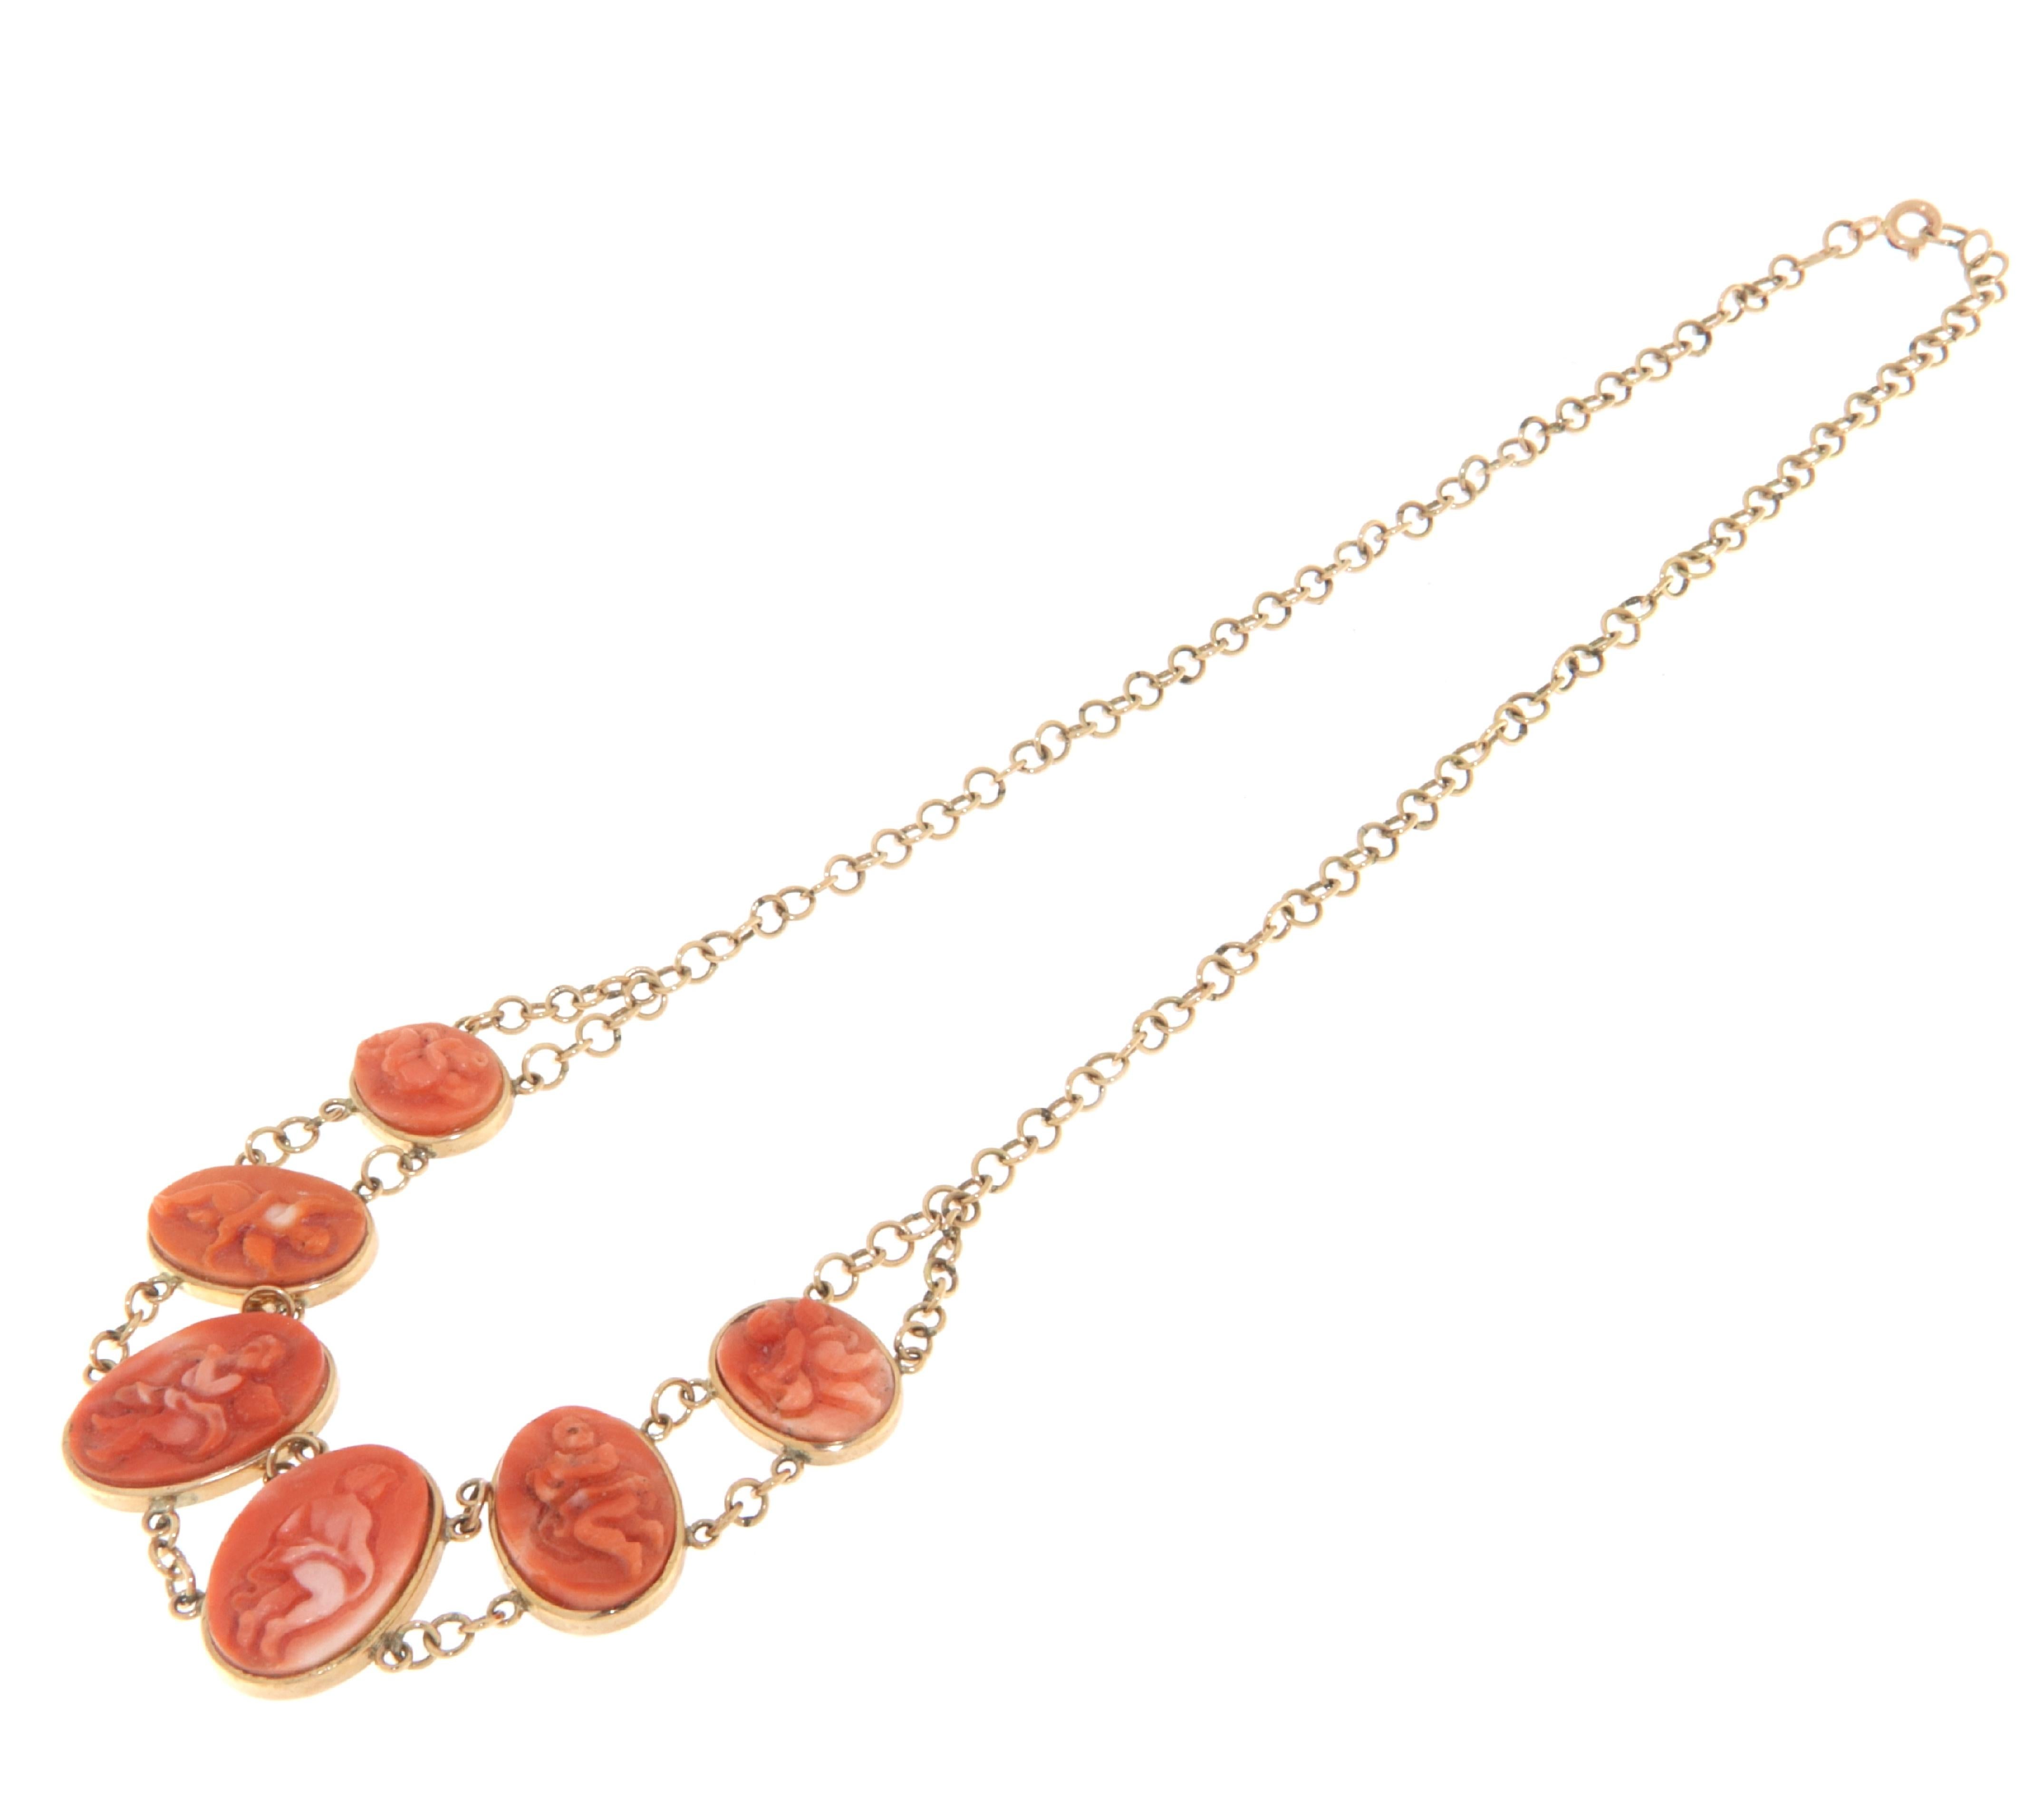 Choker necklace made at the beginning of the twentieth century in 14 Kt yellow gold mounted with spectacular coral cherubs depicting many small angels.

A necklace that entirely reflects the flavor of the time, expressing charm for the small